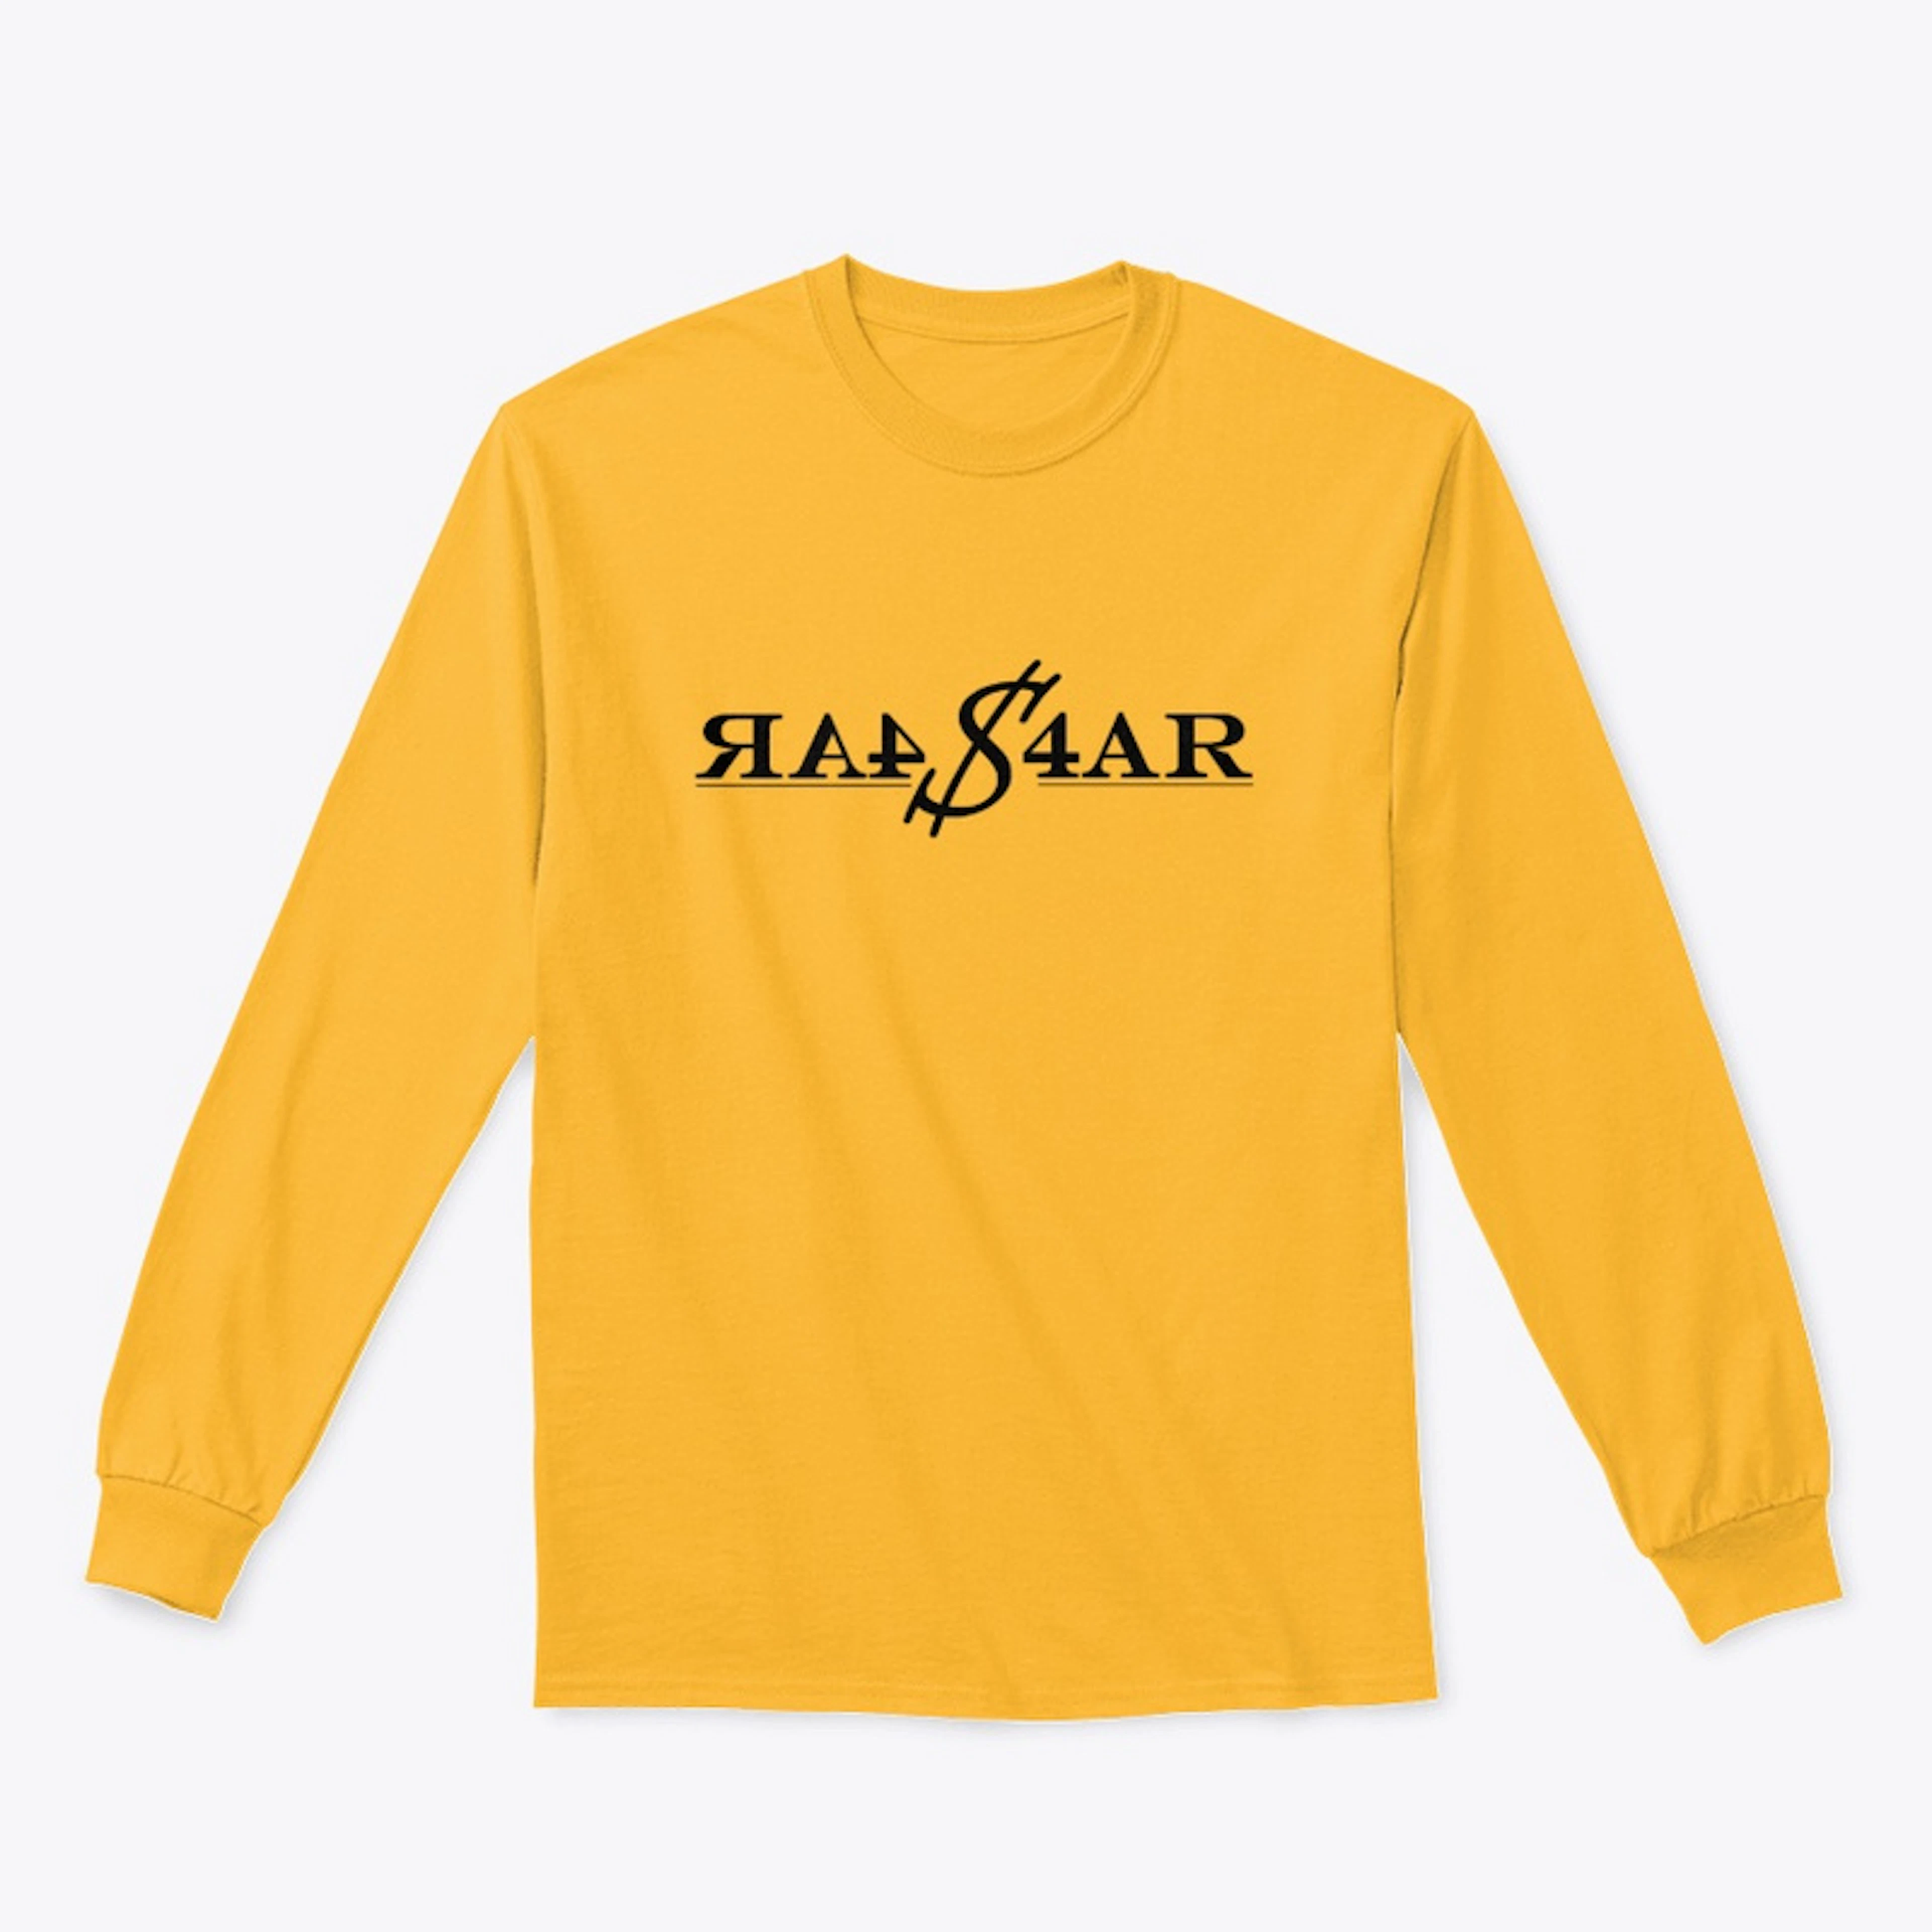 BLK "$4AR" Colors Available Long Sleeves